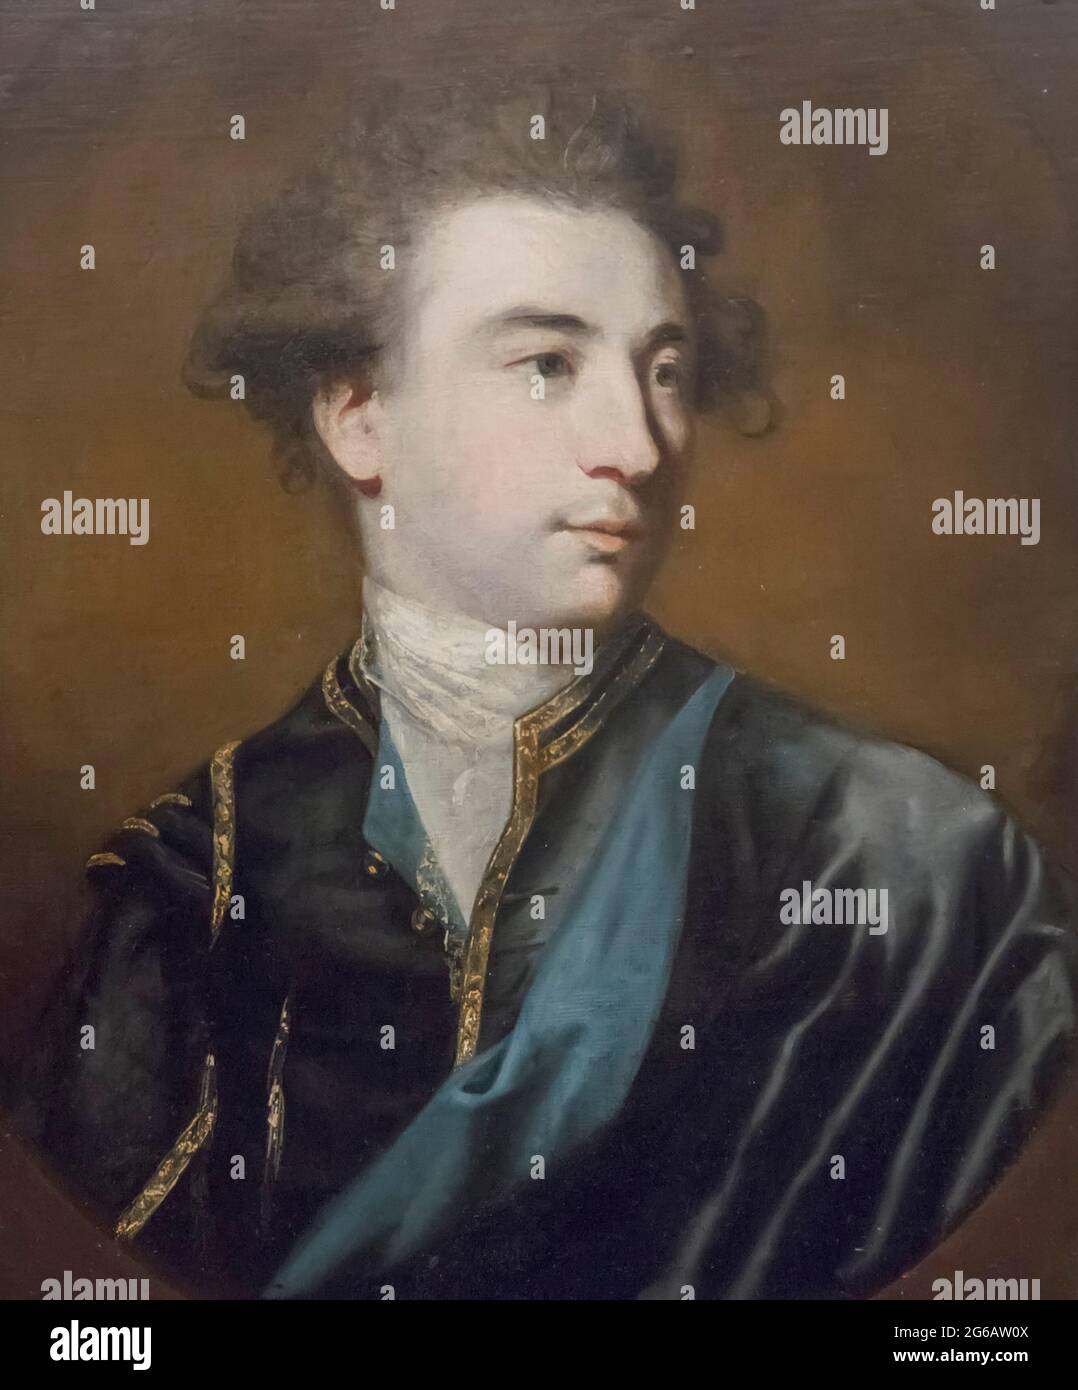 Detail of Portrait of William Hanger, 3rd Baron Coleraine by Joshua Reynolds c,1775-80 in the Soumaya Museum, Mexico City, Mexico Stock Photo